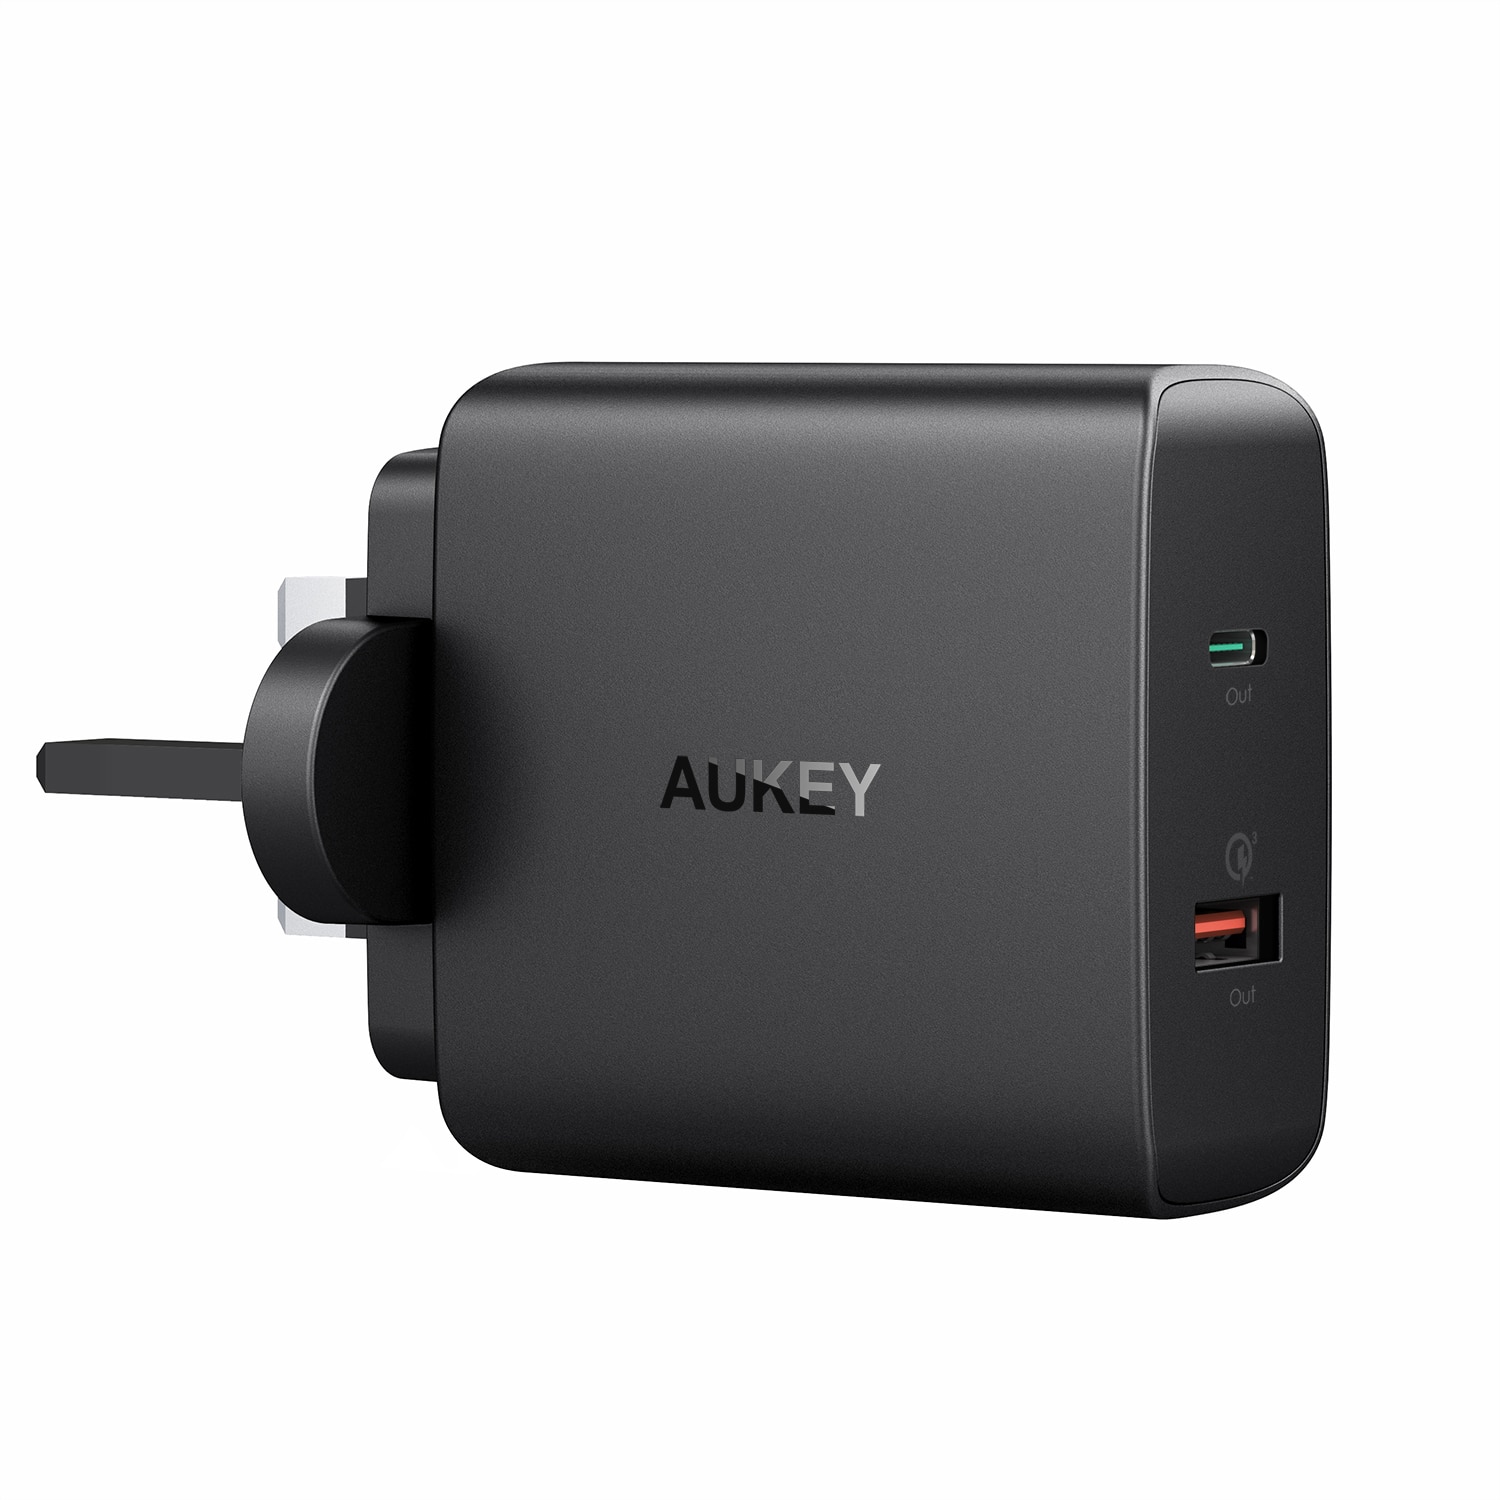 Aukey Uk Plug PA-Y11 Quick Charge 48W 3.0 Mobiele Telefoon Oplader Snel Opladen Usb Lader Voor Telefoon Mobiele usb Adapter